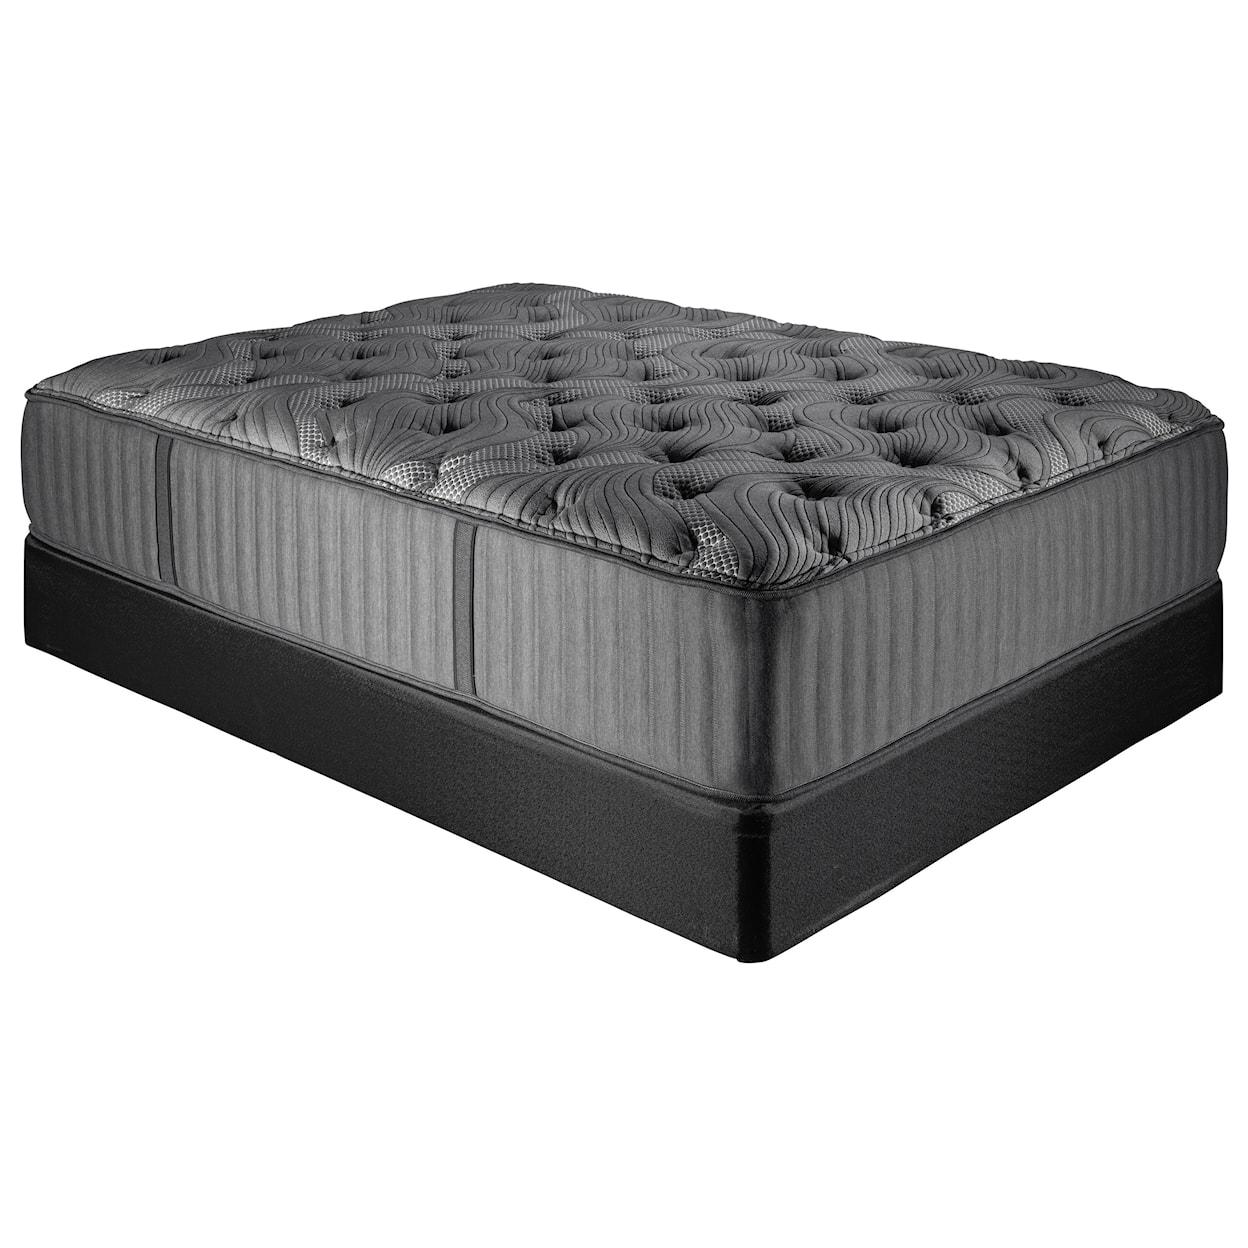 Spring Air KATE LUXURY FIRM TWIN LUXURY FIRM MATTRESS